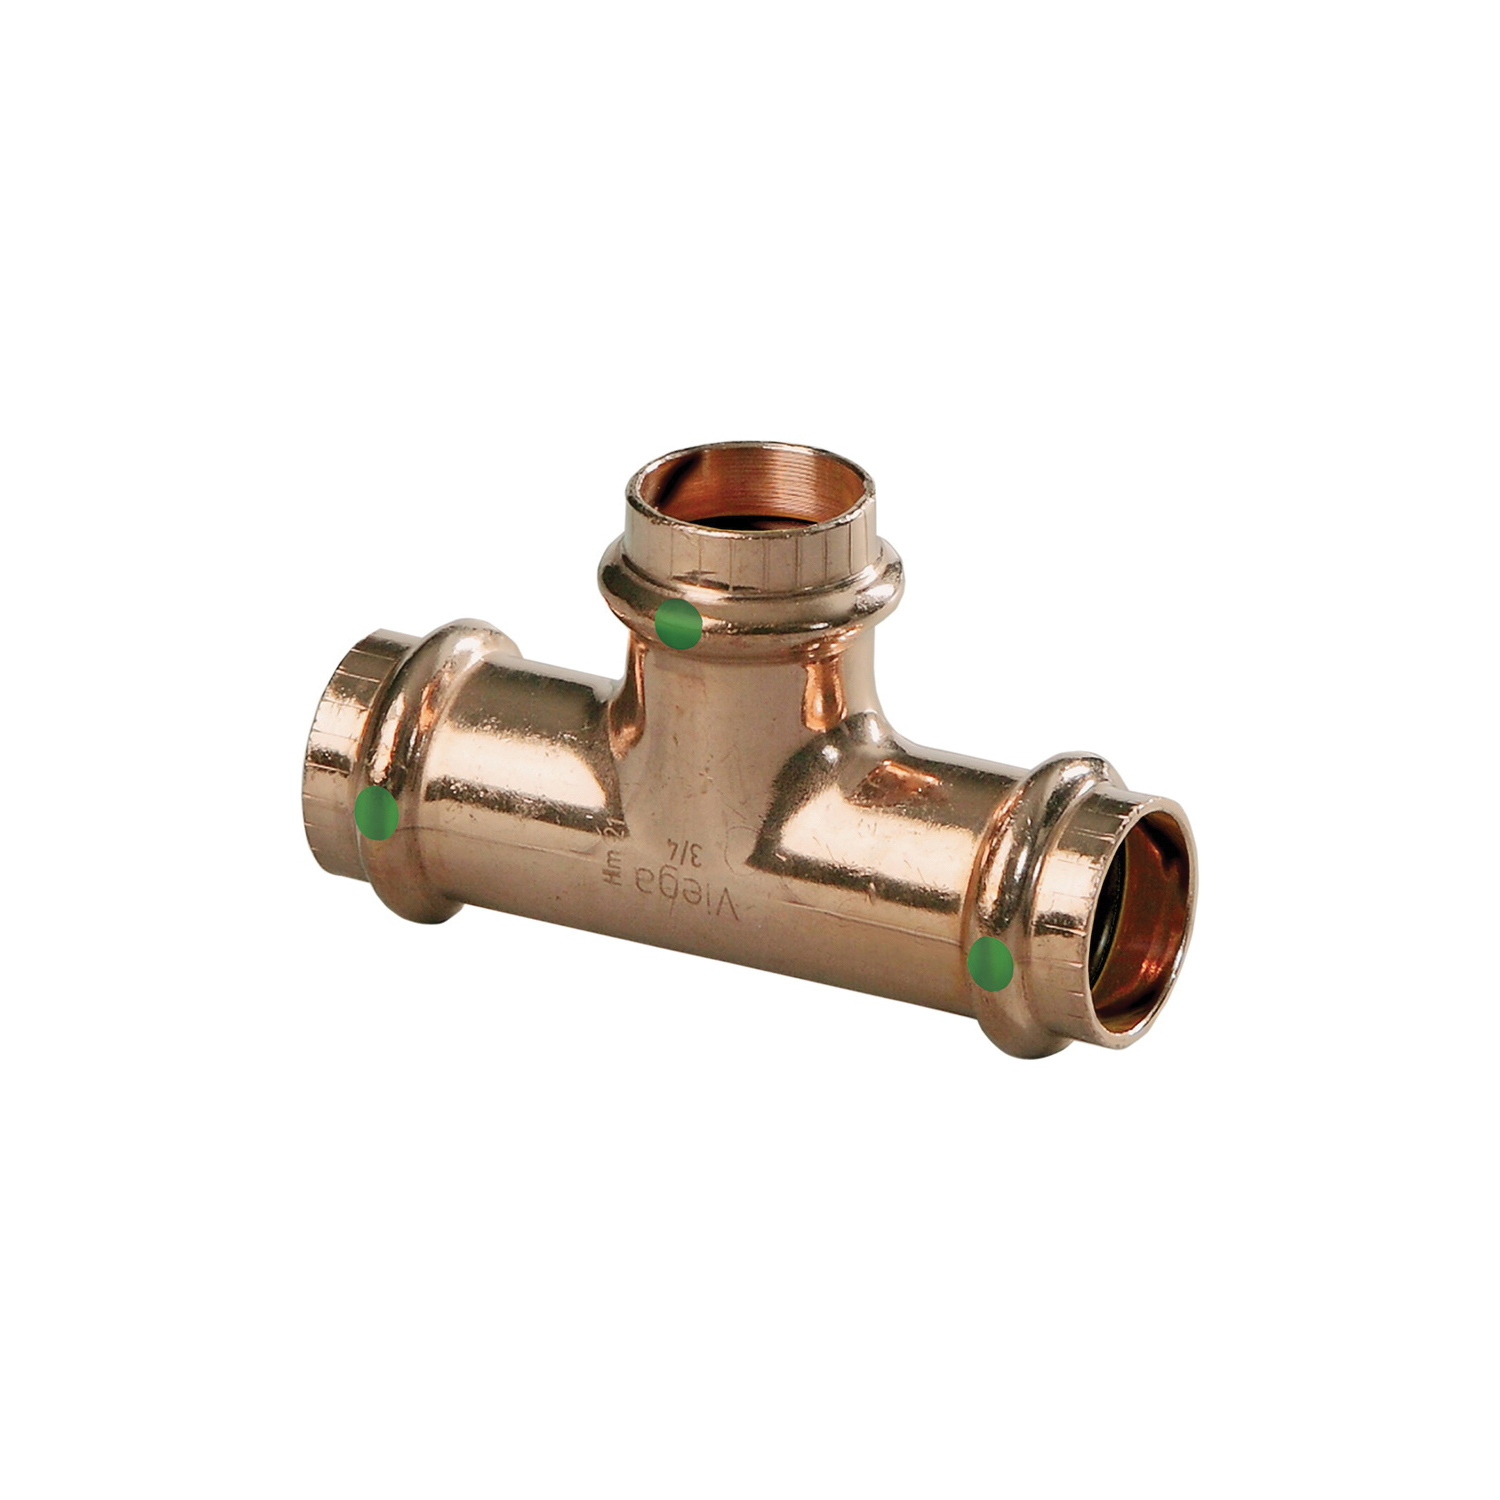 ProPress® 77452 Pipe Tee, 1-1/4 x 1-1/4 x 3/4 in Nominal, Press End Style, Copper, Import